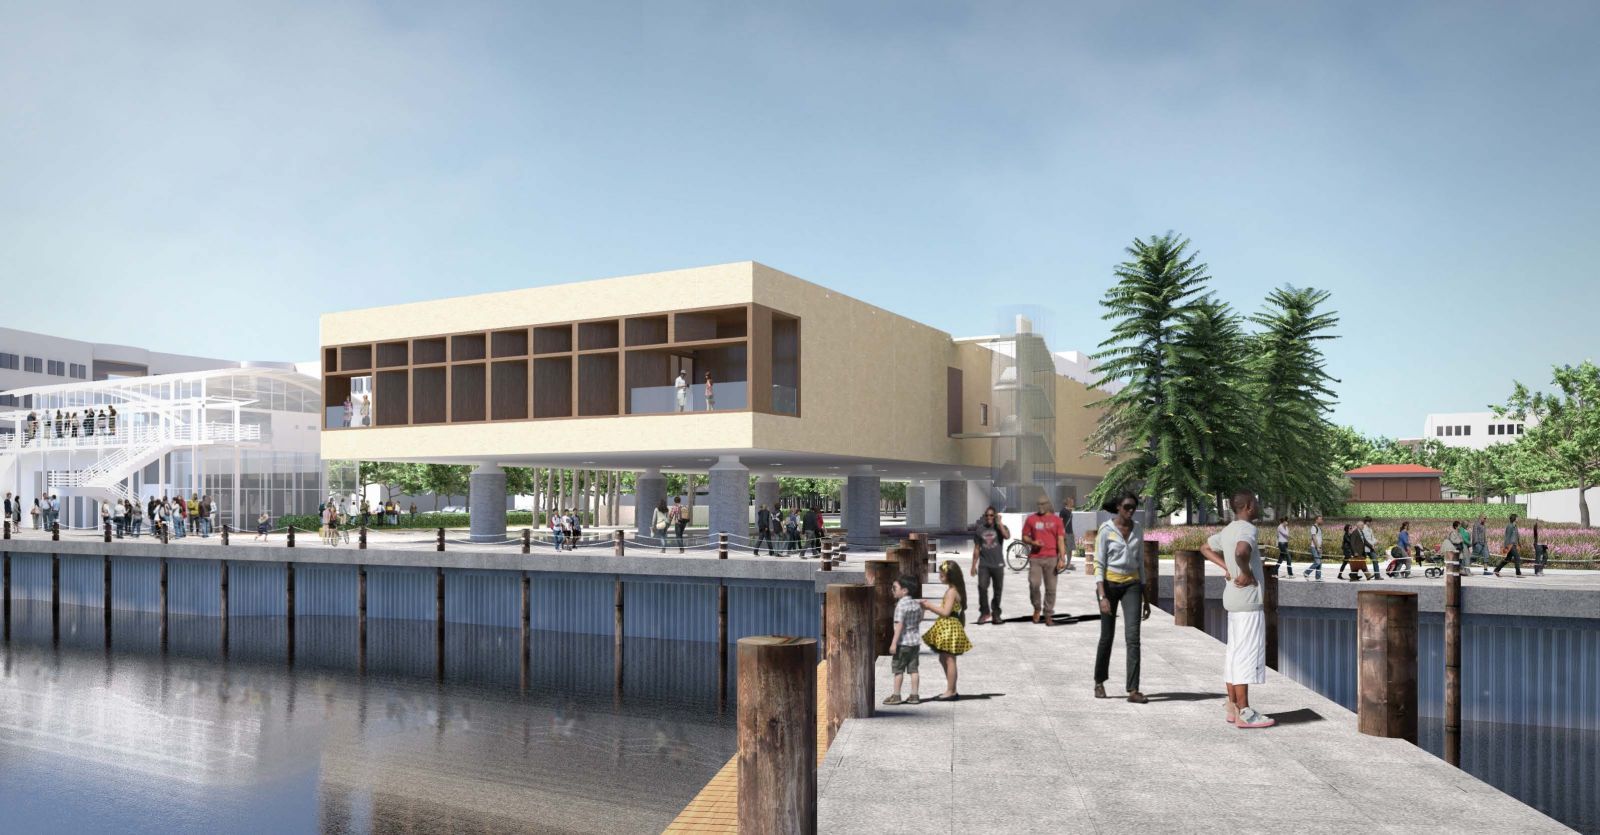 The International African American Museum is scheduled to begin construction later this year and open to the public in 2021. (Rendering/provided)